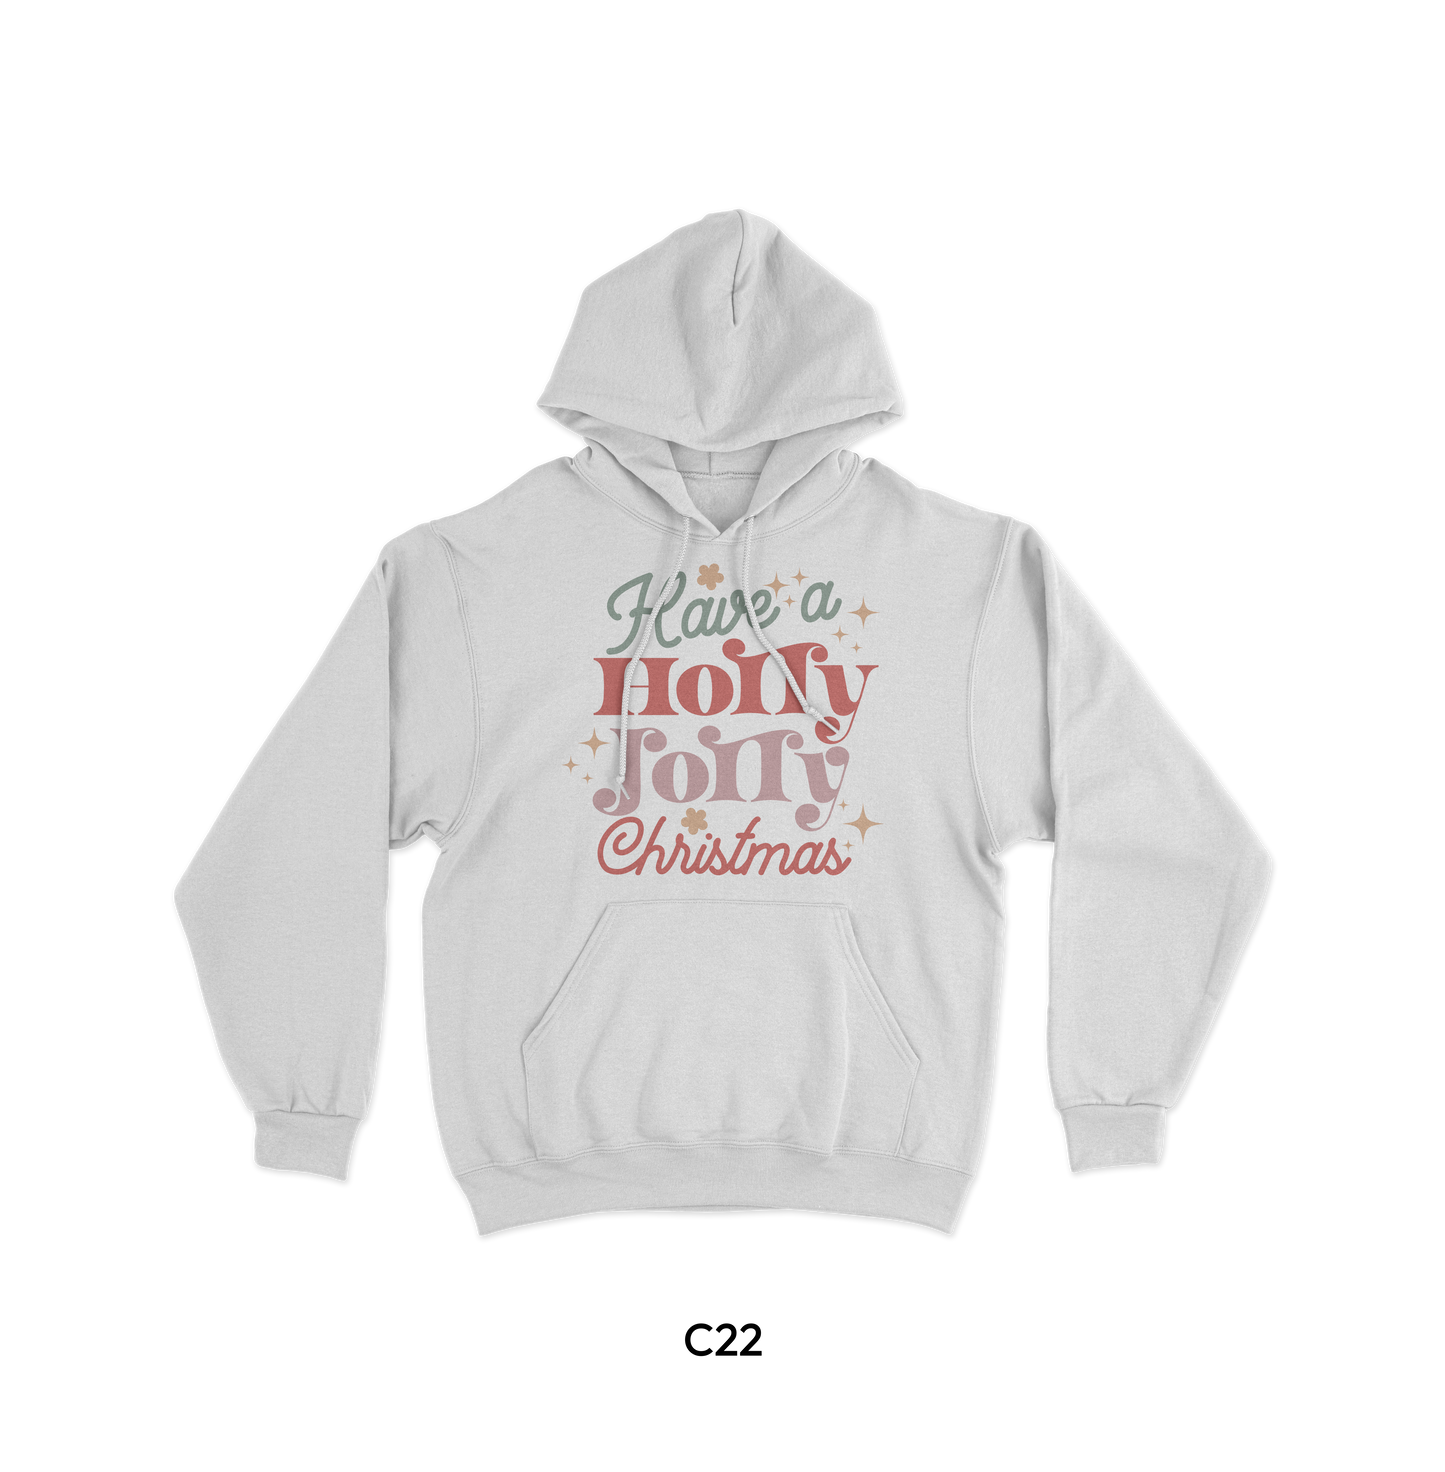 Have a Holly Jolly Christmas Design (C22)